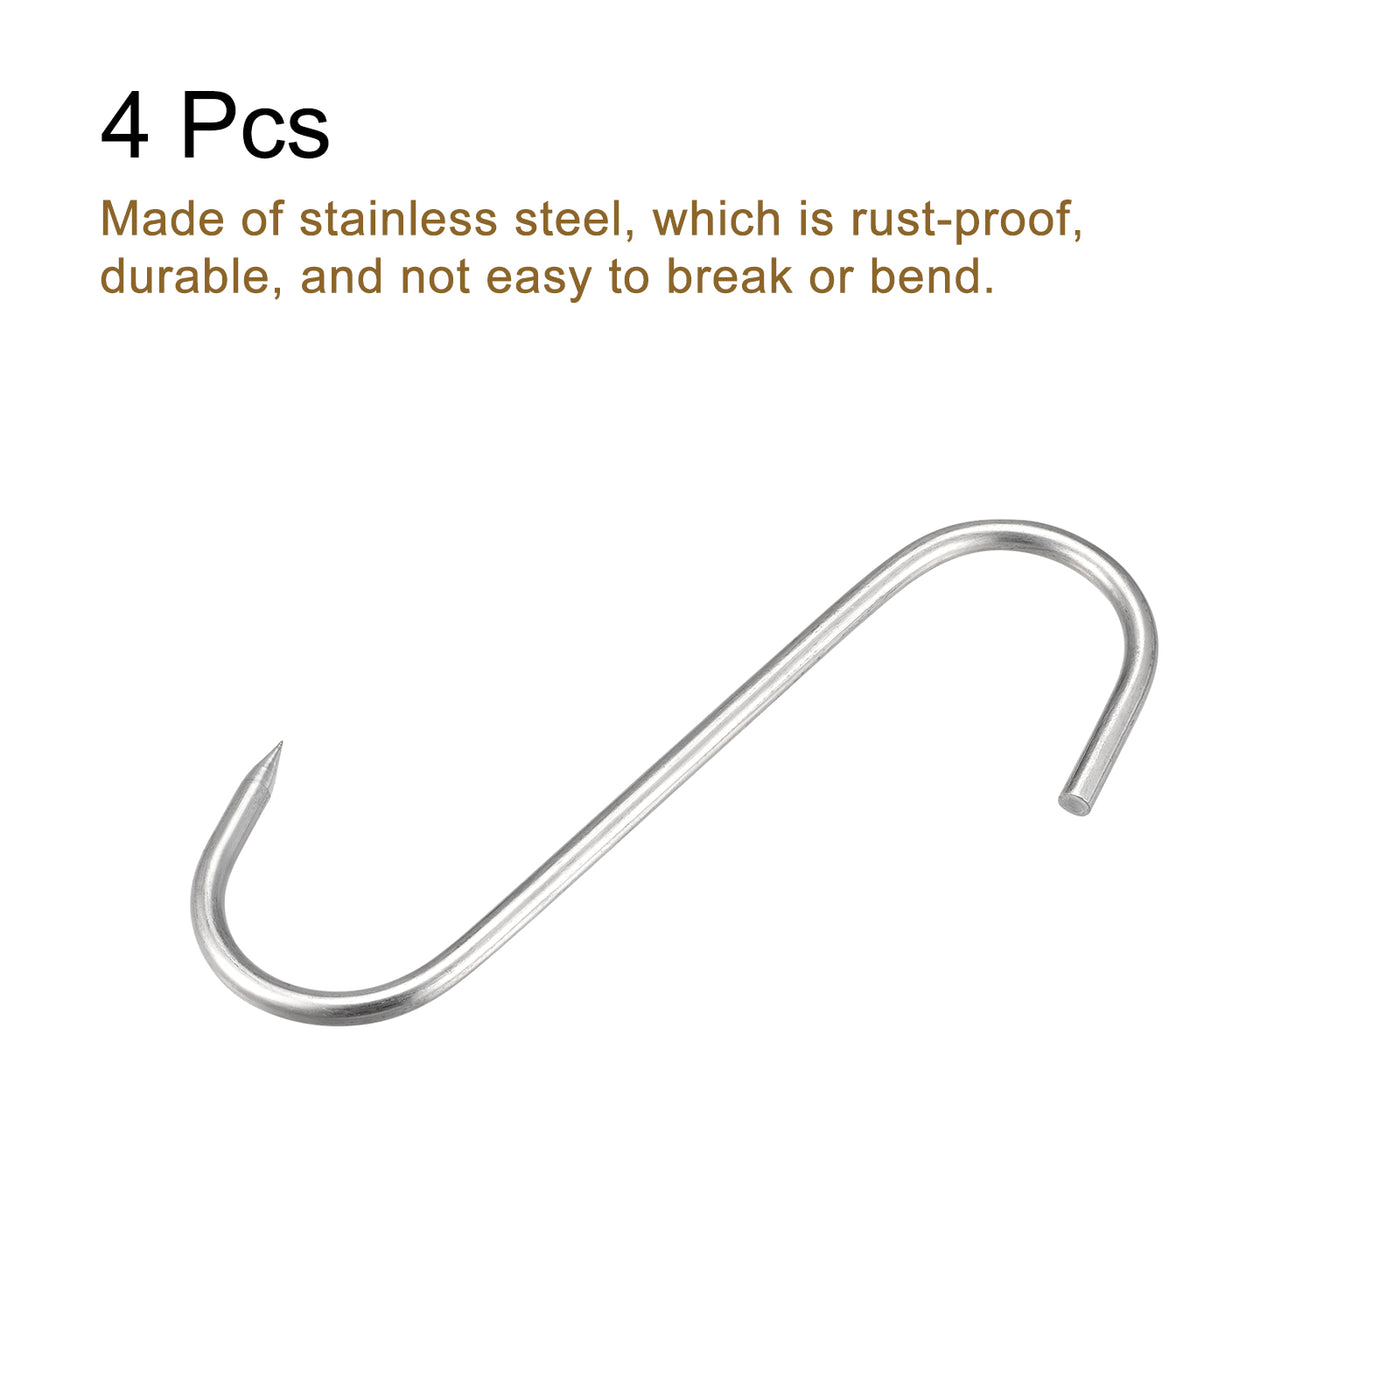 uxcell Uxcell Meat Hooks, Stainless Steel S-Hooks, Meat Processing for Chicken Fish Beef Hanging Drying Smoking